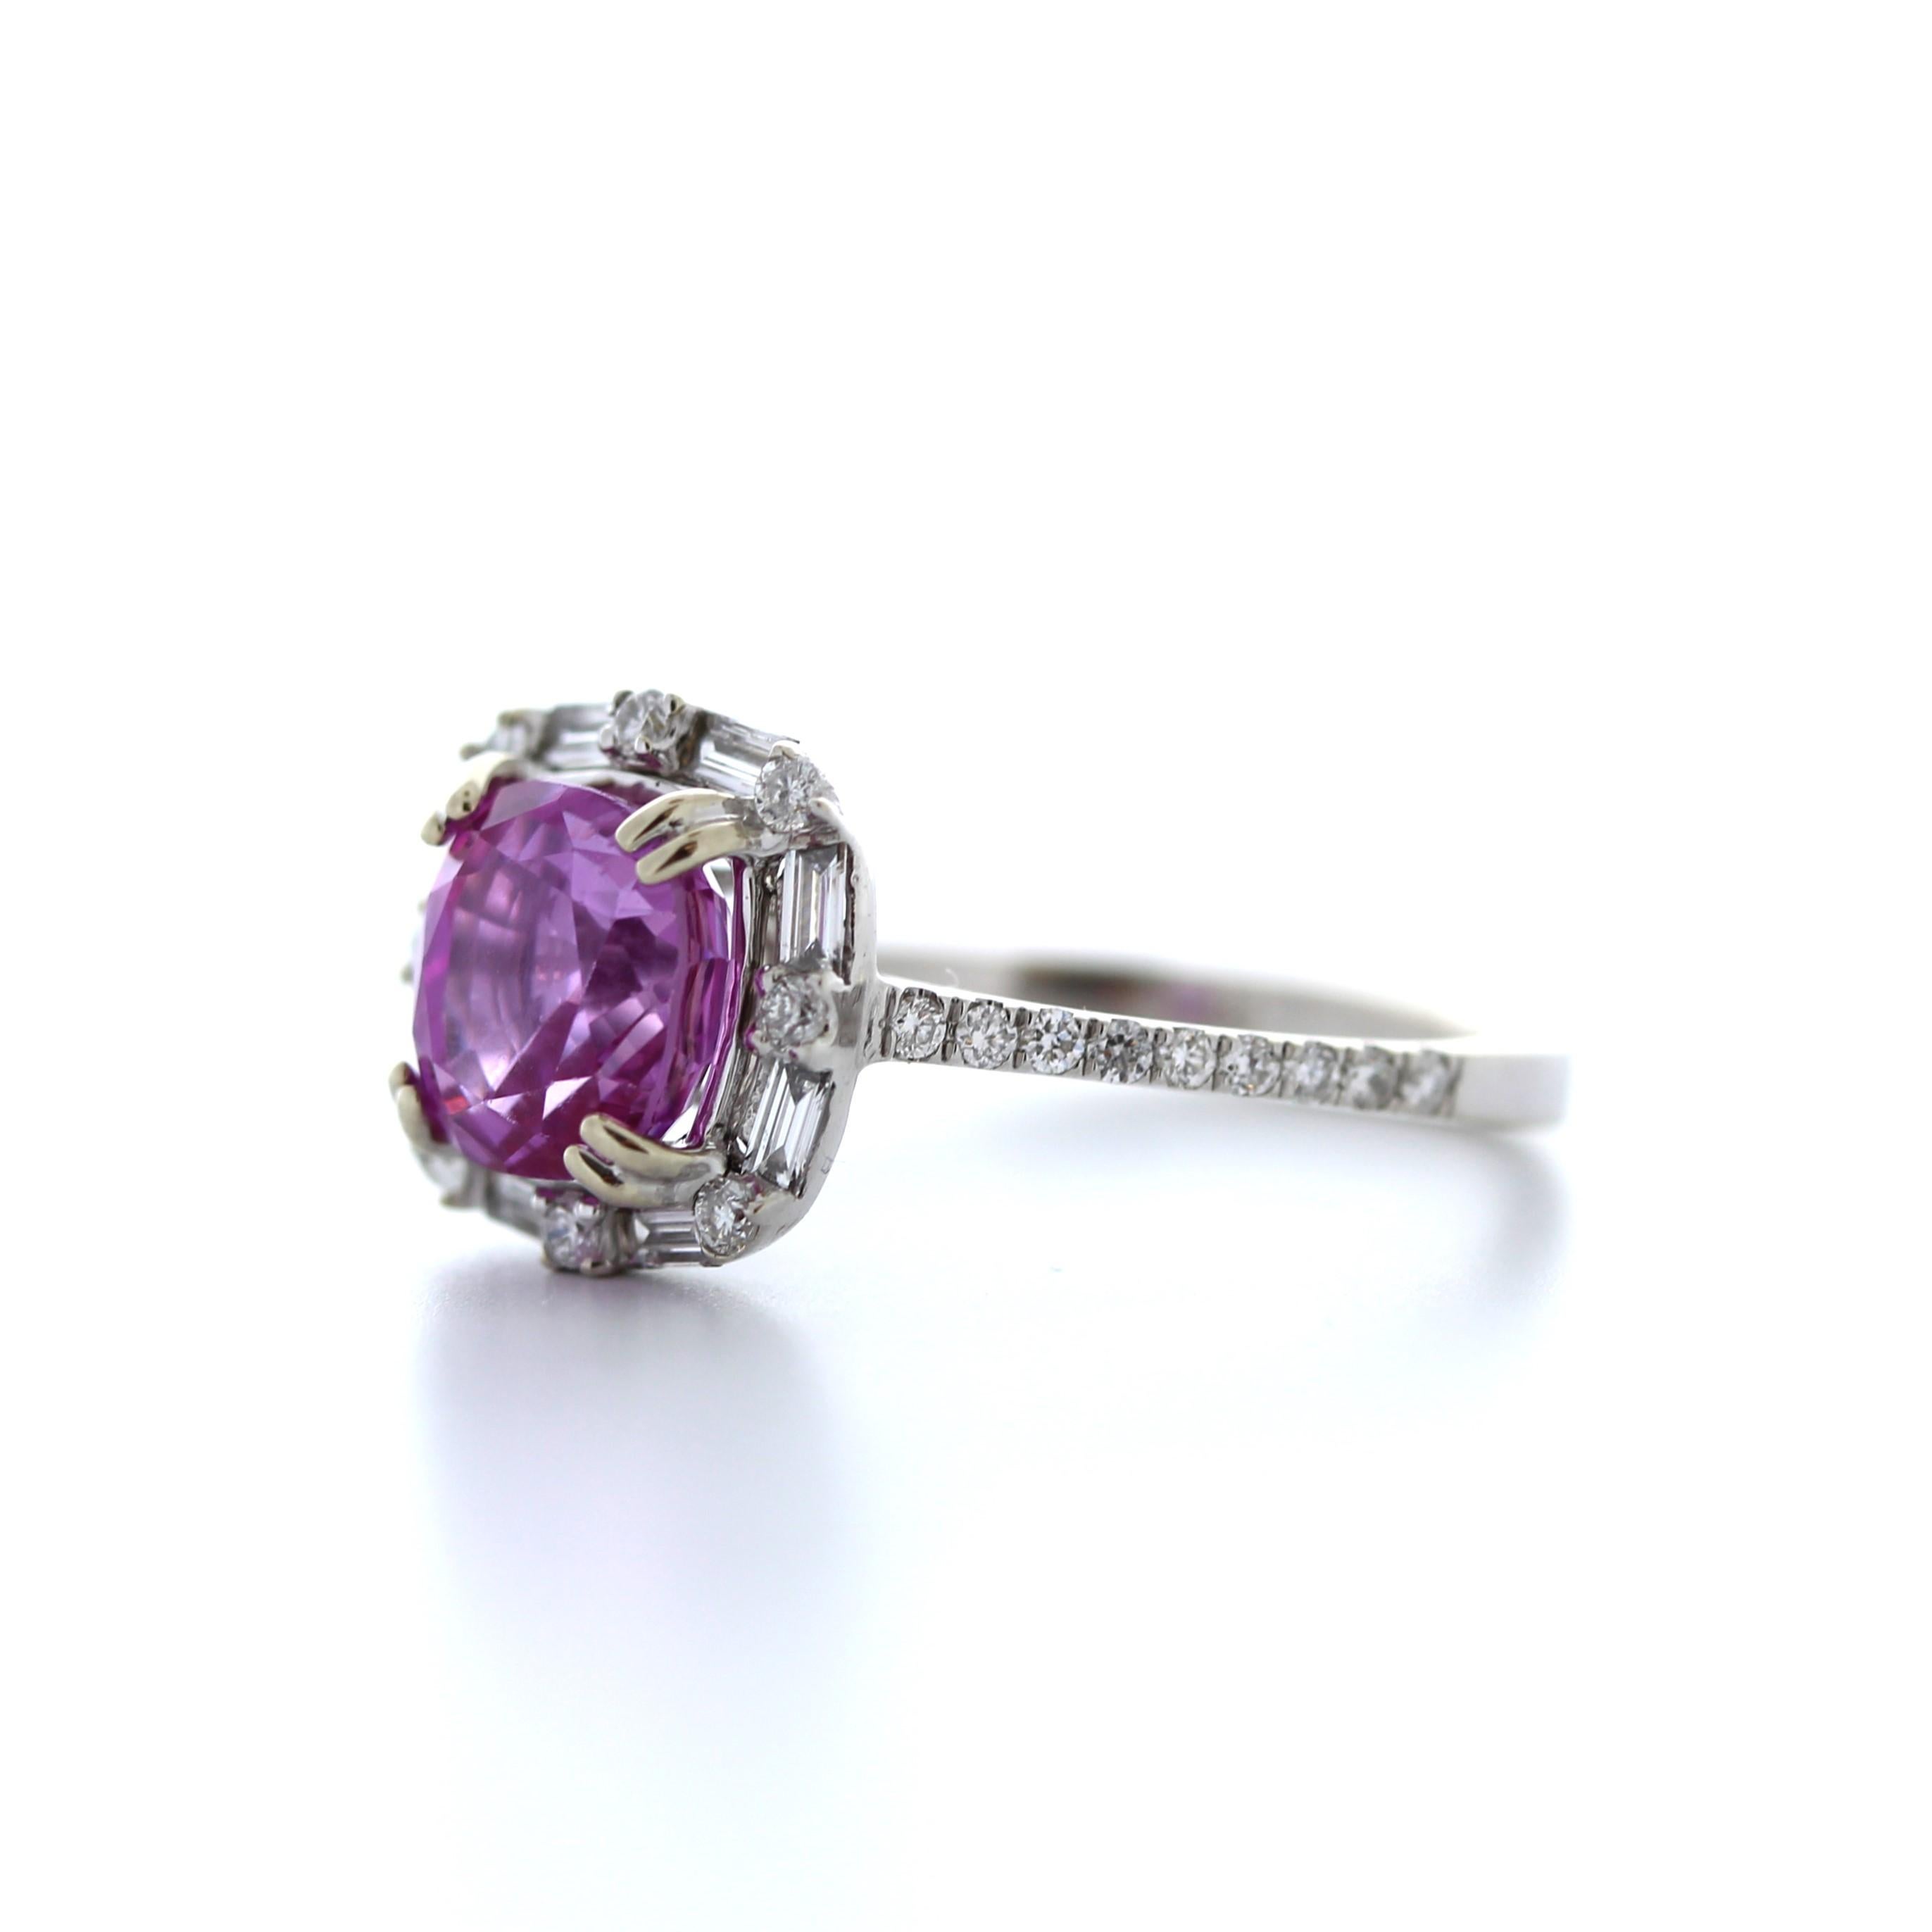 This enchanting 2.81 carat weight round pink sapphire fashion ring is a beautiful and feminine choice for any occasion. The sapphire is a lovely shade of pink and boasts exceptional clarity and brilliance, weighing in at 2.81 carats. It is set in